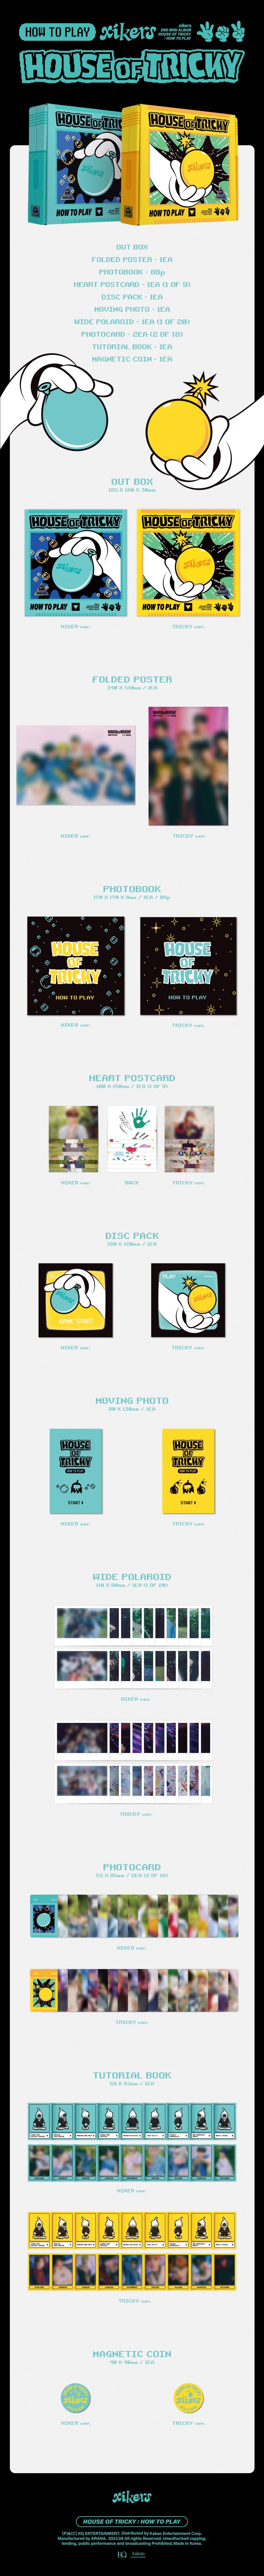 1 CD
1 Photo Book (88 pages)
1 Folded Poster
1 Heart Postcard (random out of 9 types)
1 Moving Photo
1 Wide Polaroid (rand...